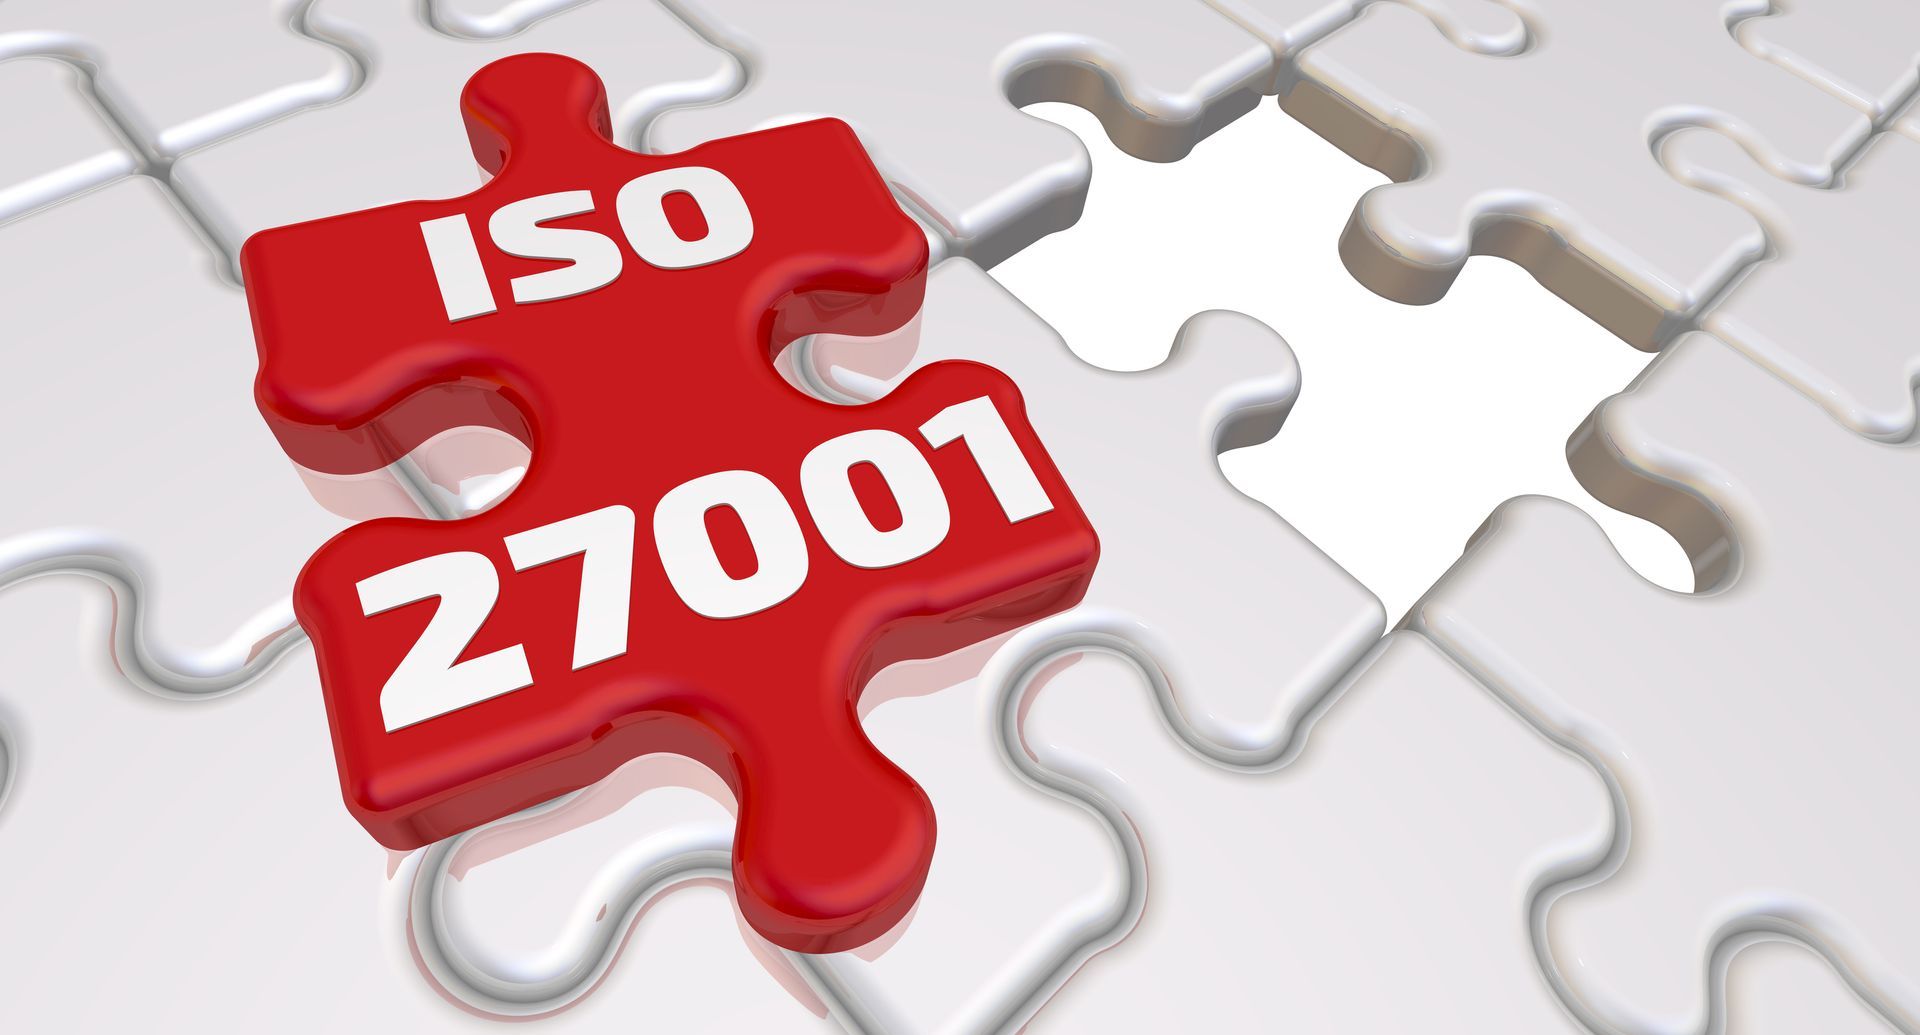 ISO 27001 Information